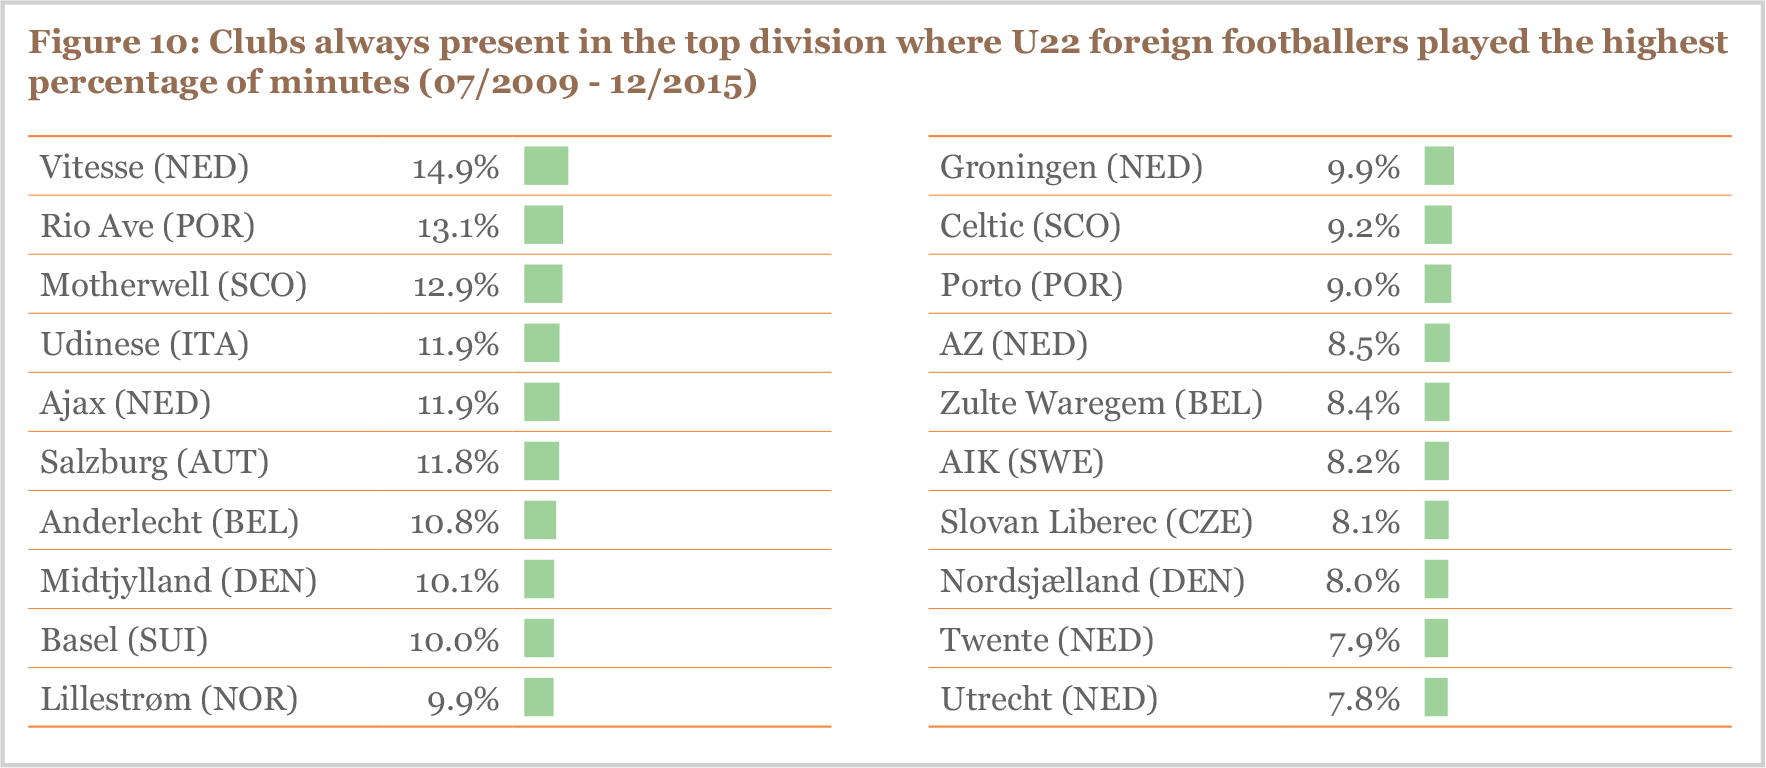 Clubs always present in the top division where U22 foreign footballers played the highest percentage of minutes (07/2009 - 12/2015)